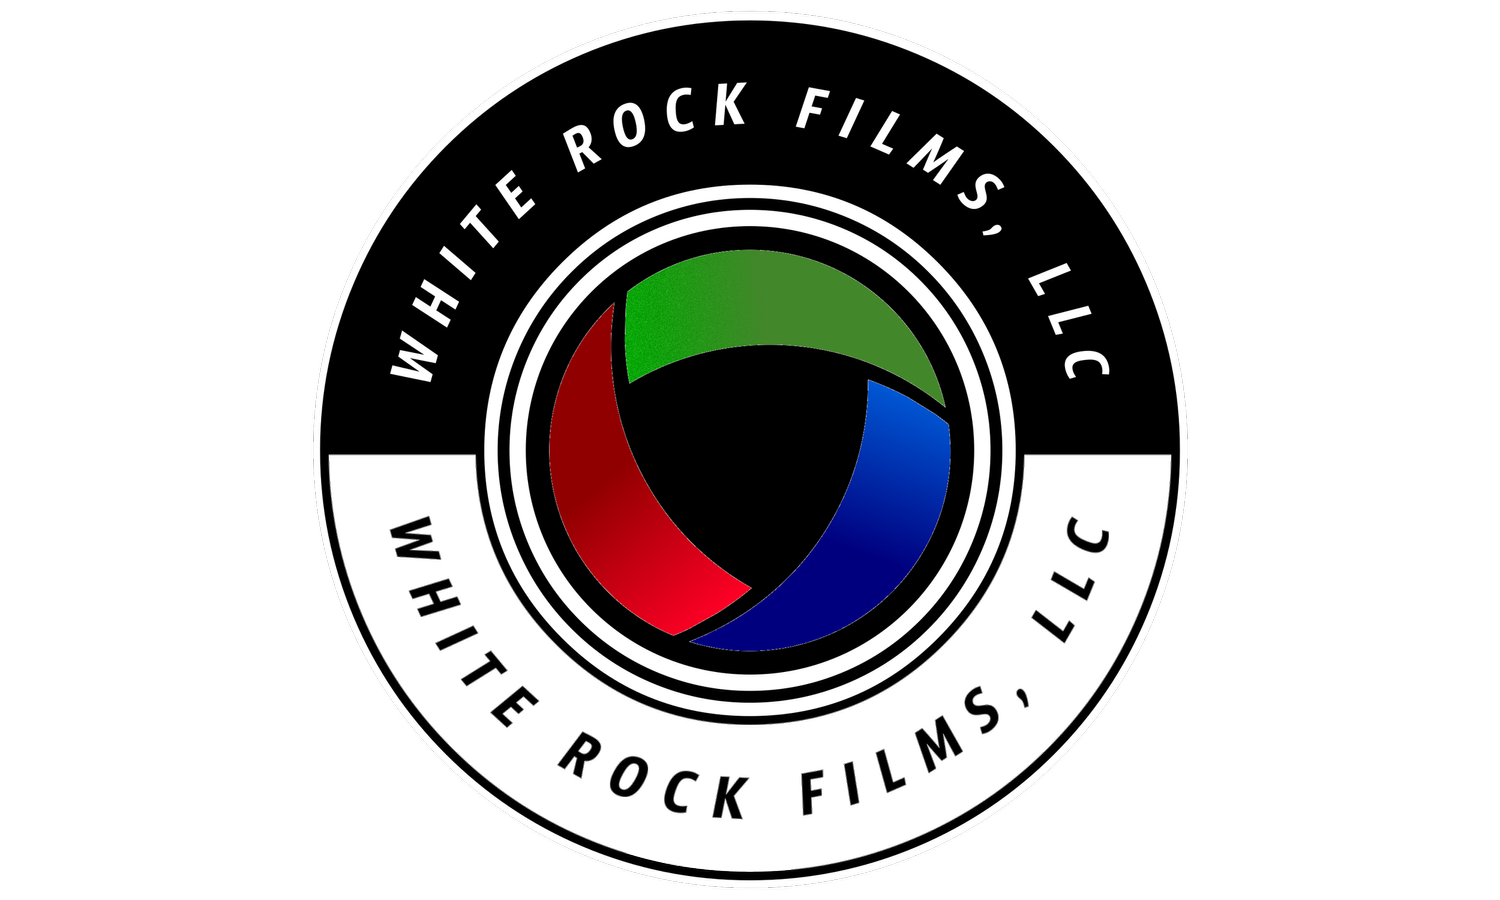 Welcome to the home of White Rock Films, LLC